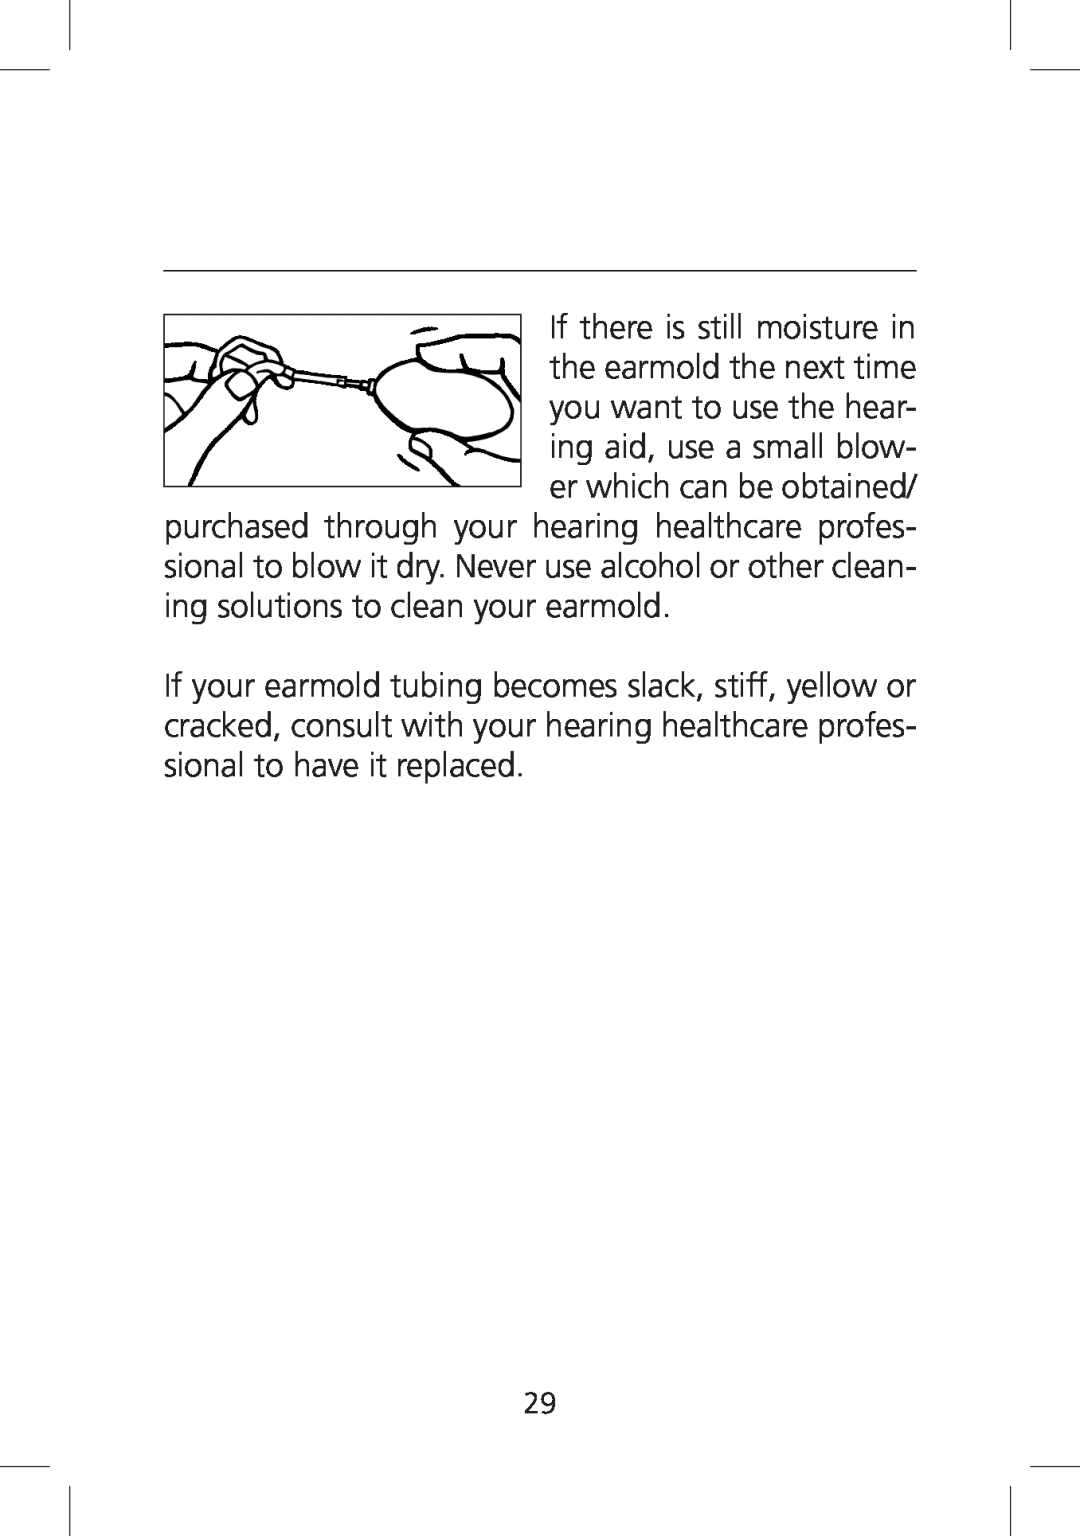 SV Sound SV-19 manual If there is still moisture in the earmold the next time, you want to use the hear 